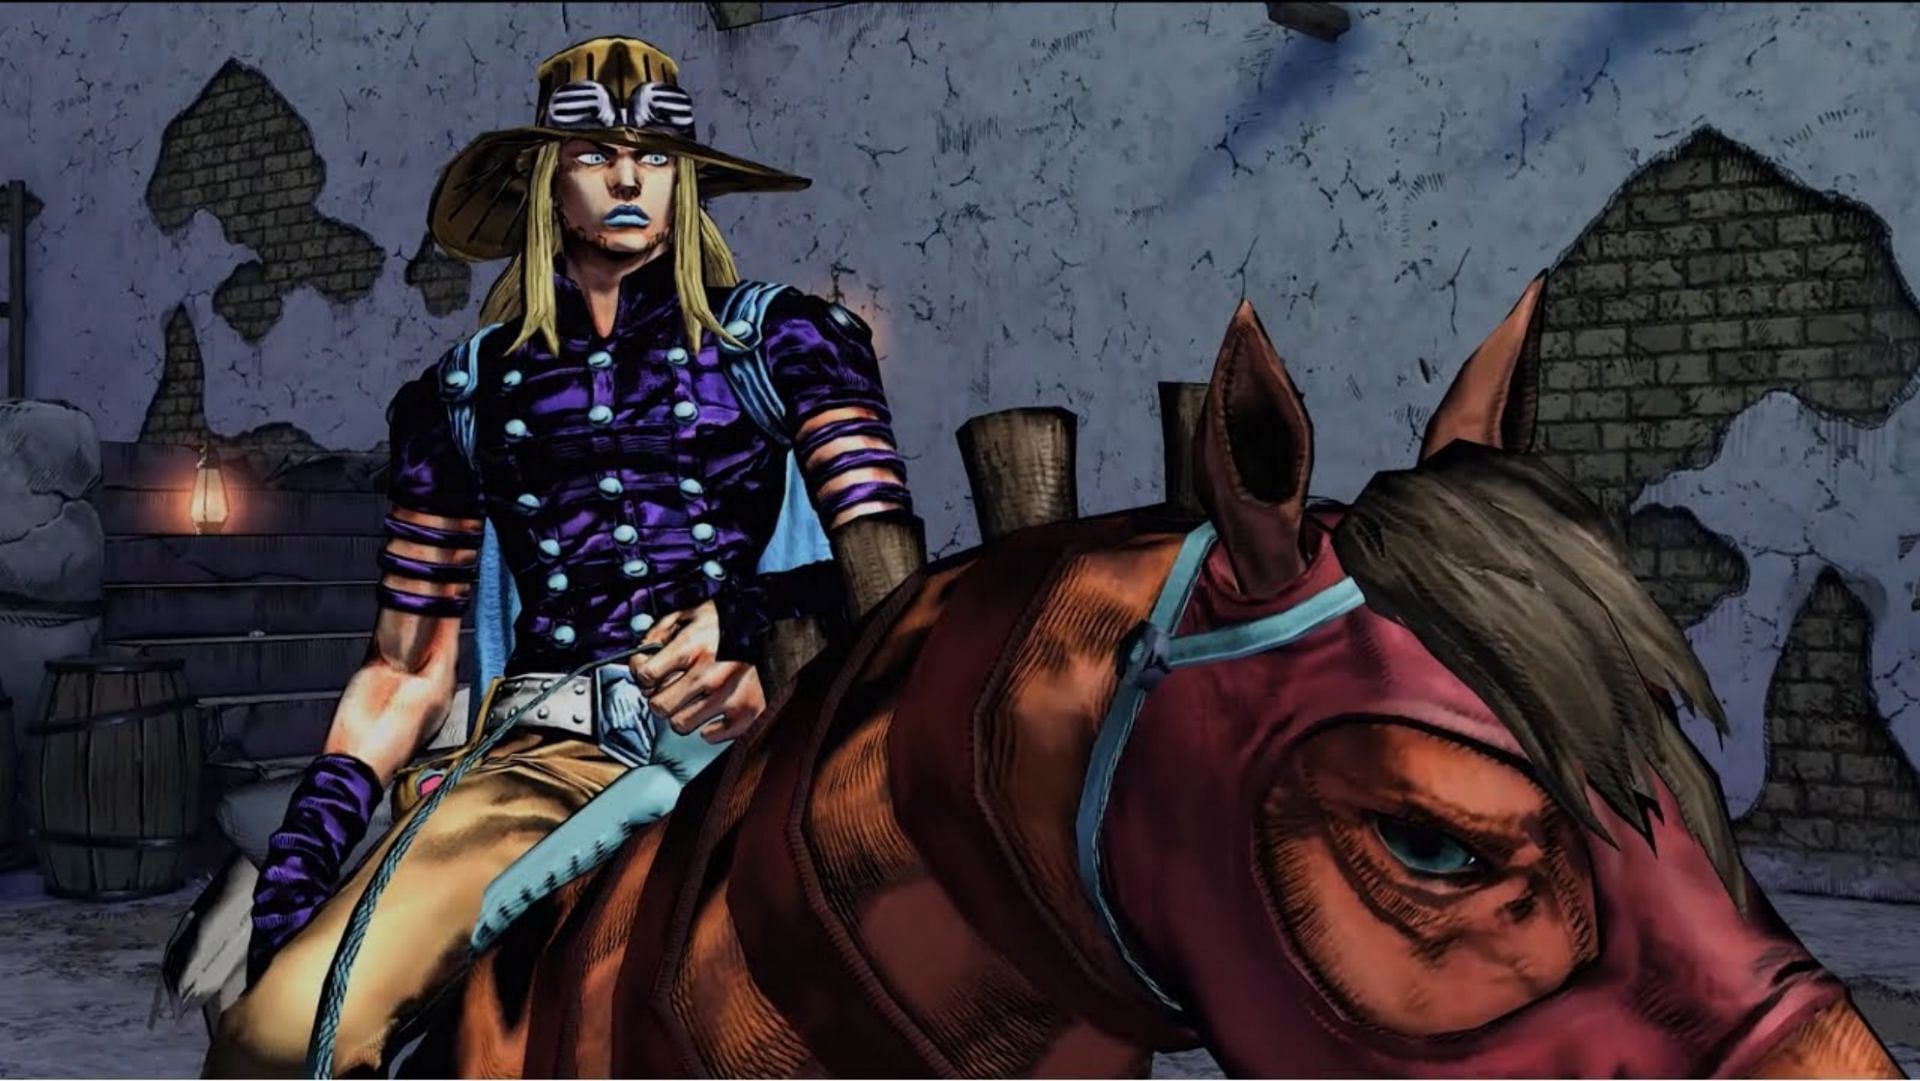 Gyro Zeppeli is one of the strongest characters in Jojo